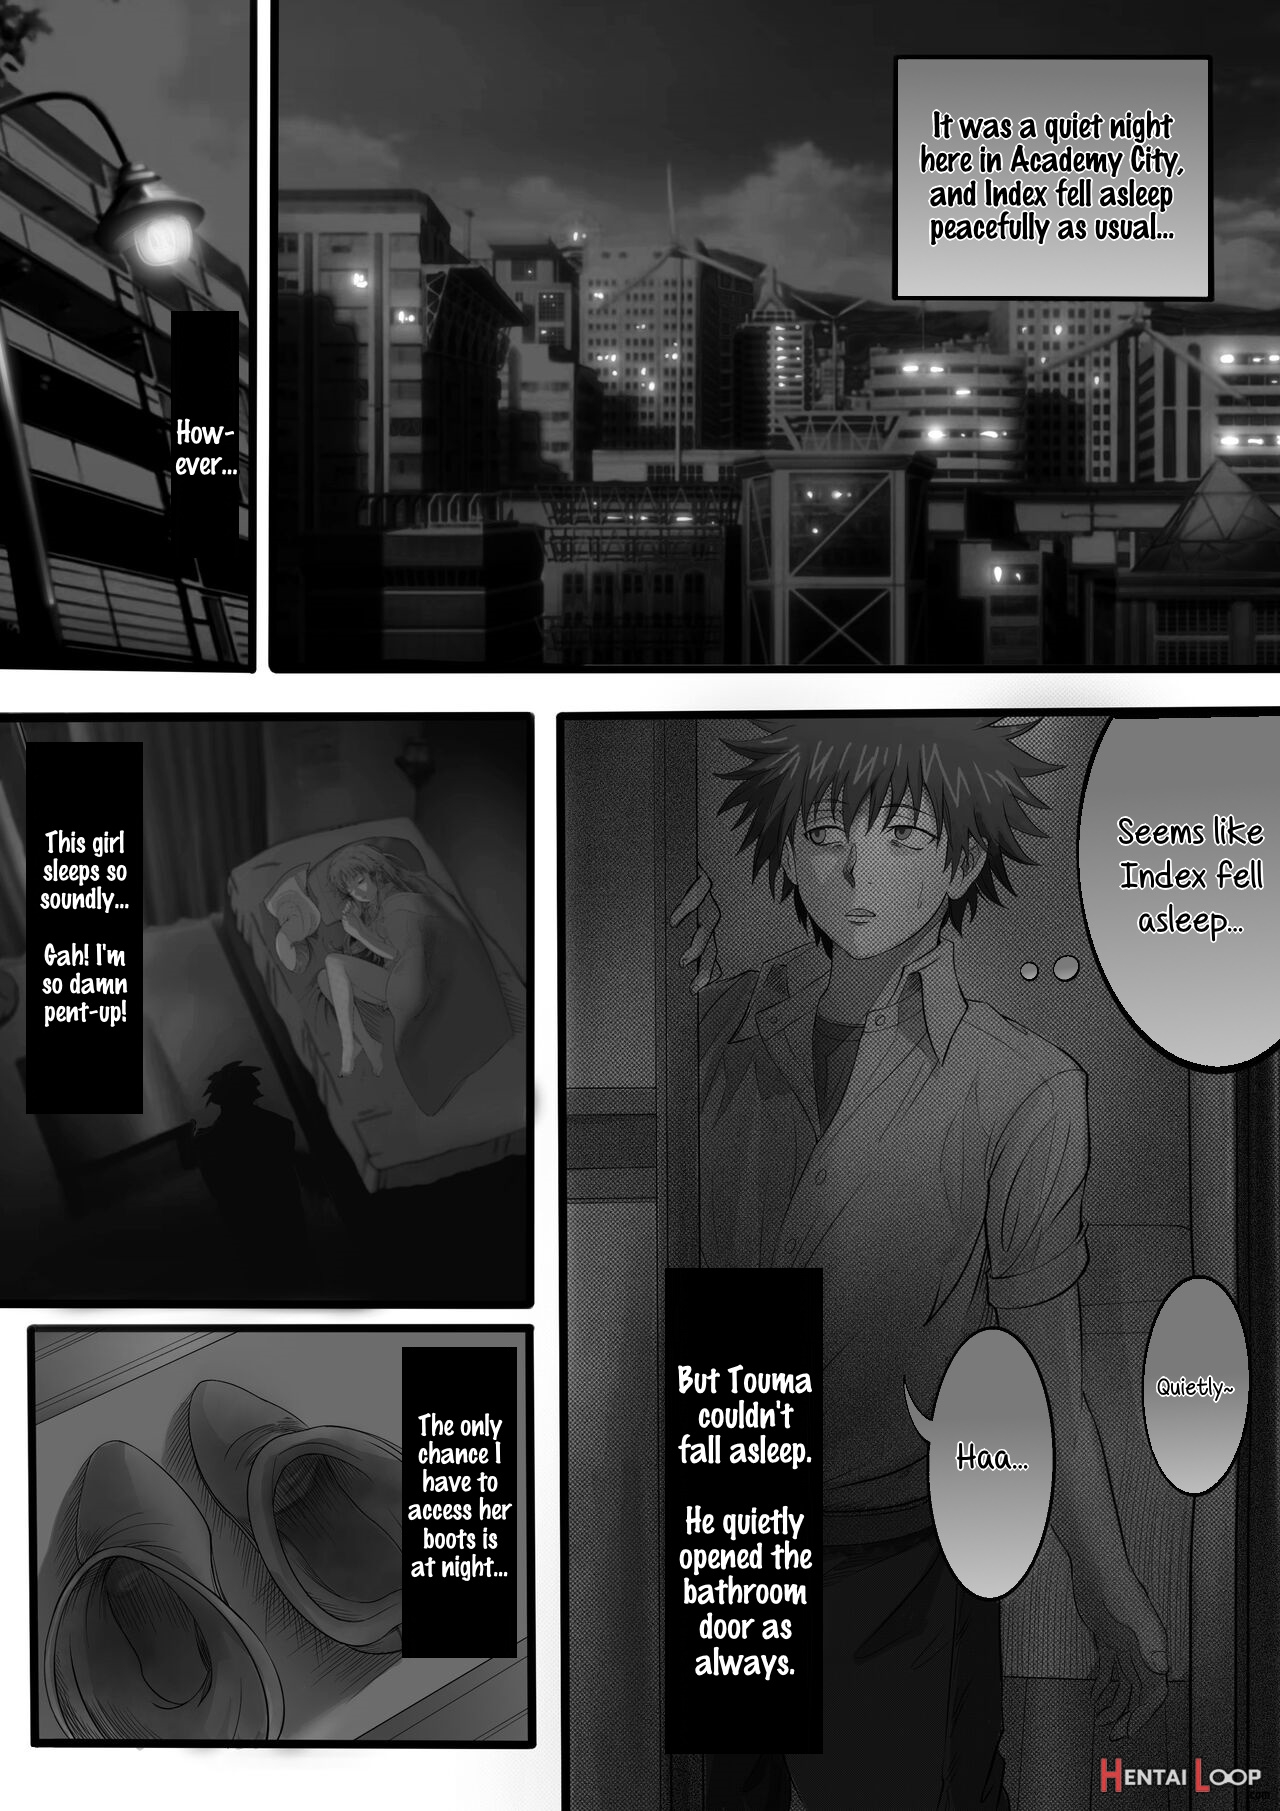 The Daily Life Of Index And Touma Every Night page 2